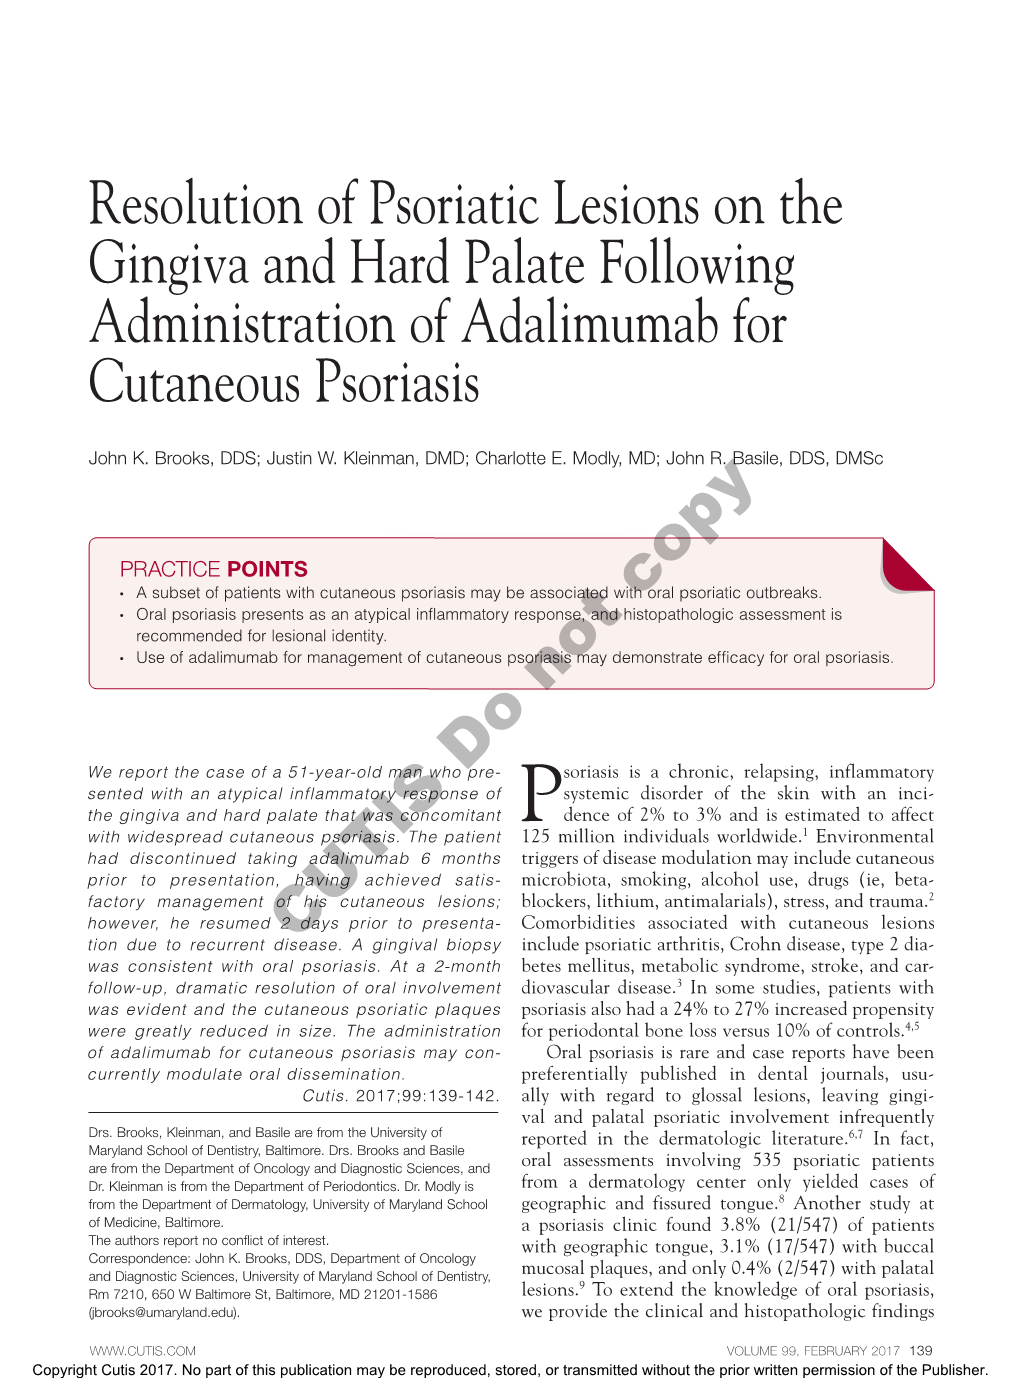 Resolution of Psoriatic Lesions on the Gingiva and Hard Palate Following Administration of Adalimumab for Cutaneous Psoriasis